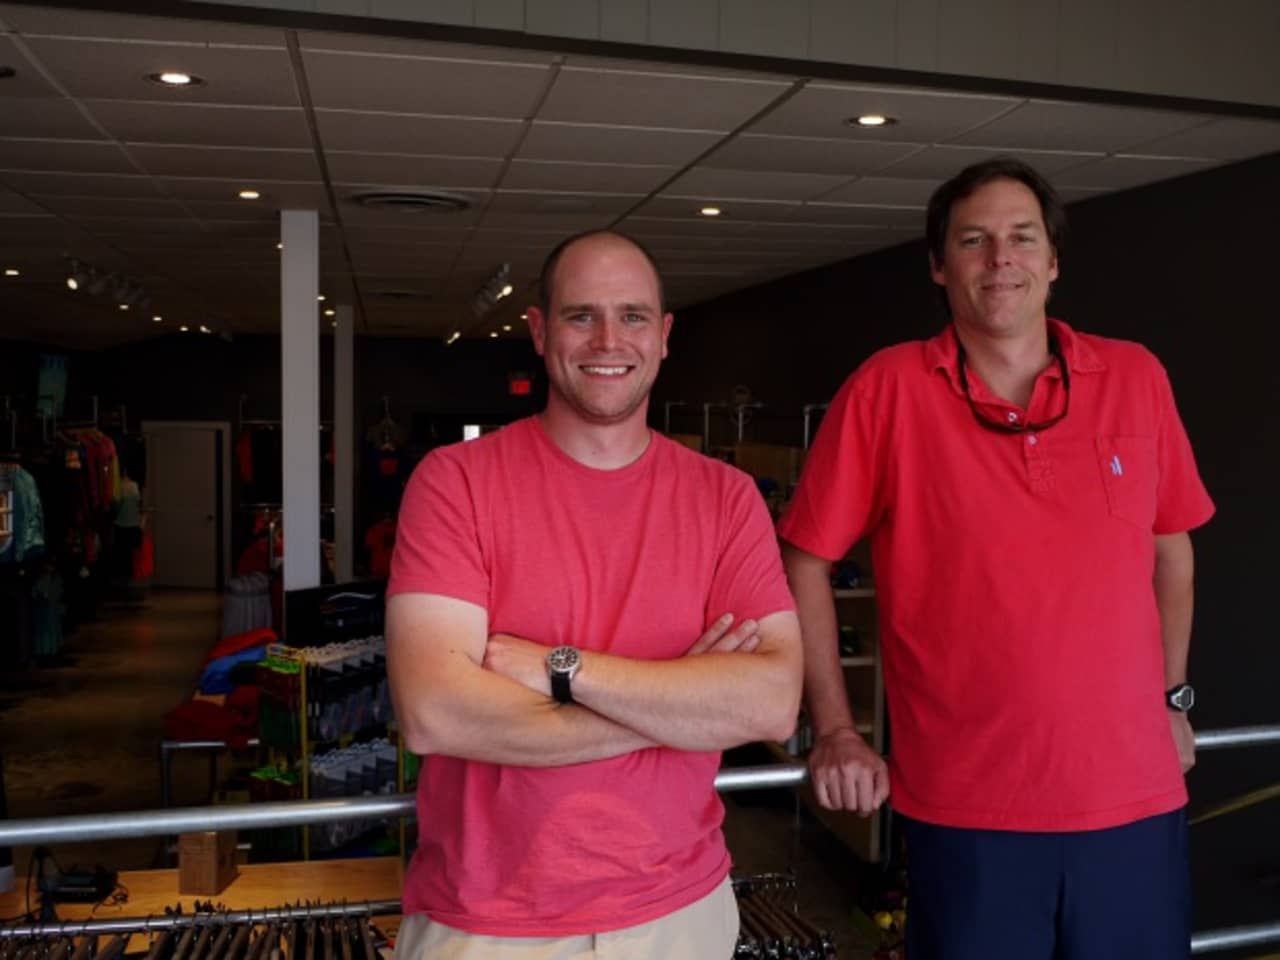 New Canaan natives Steve Seelert and Chris Sanford said they had a common vision for how they wanted their new Fairfield athletic store, The Authentic Athlete, to look.